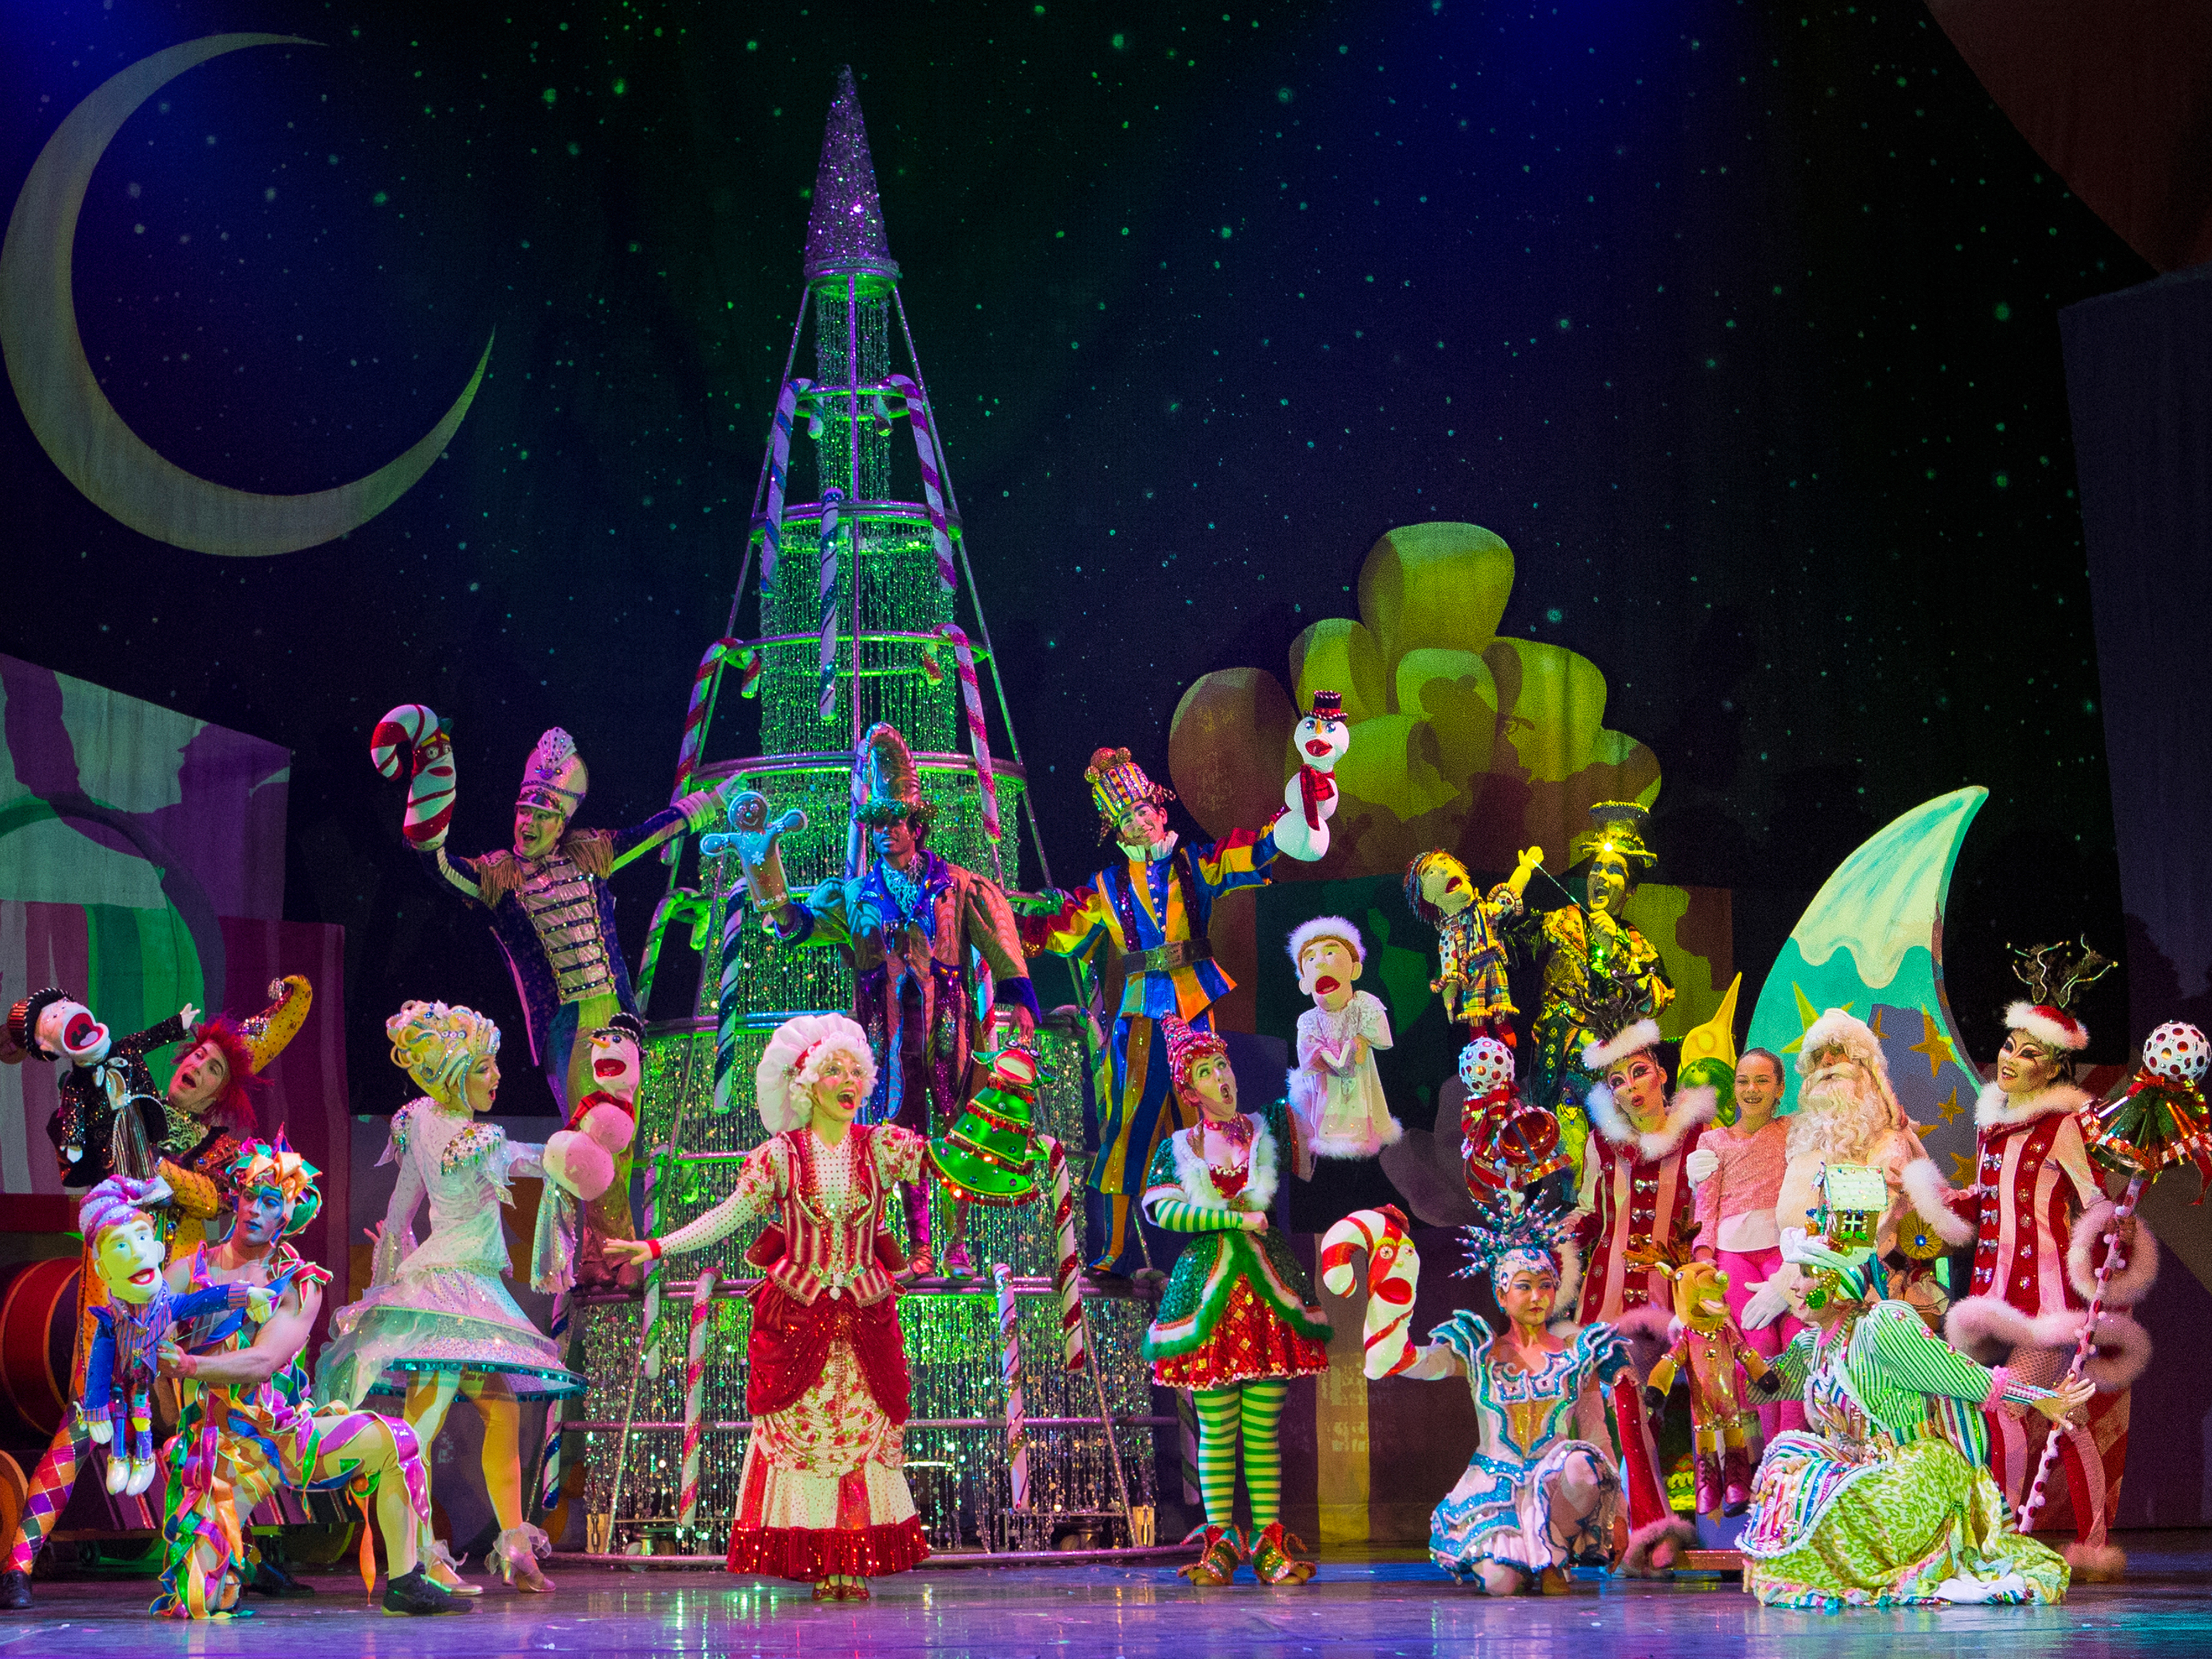 Cirque Dreams Holidaze at the Kings Theatre in Brooklyn, NY. It will run for six (6) performances from November 29, 2018 – December 2, 2018.